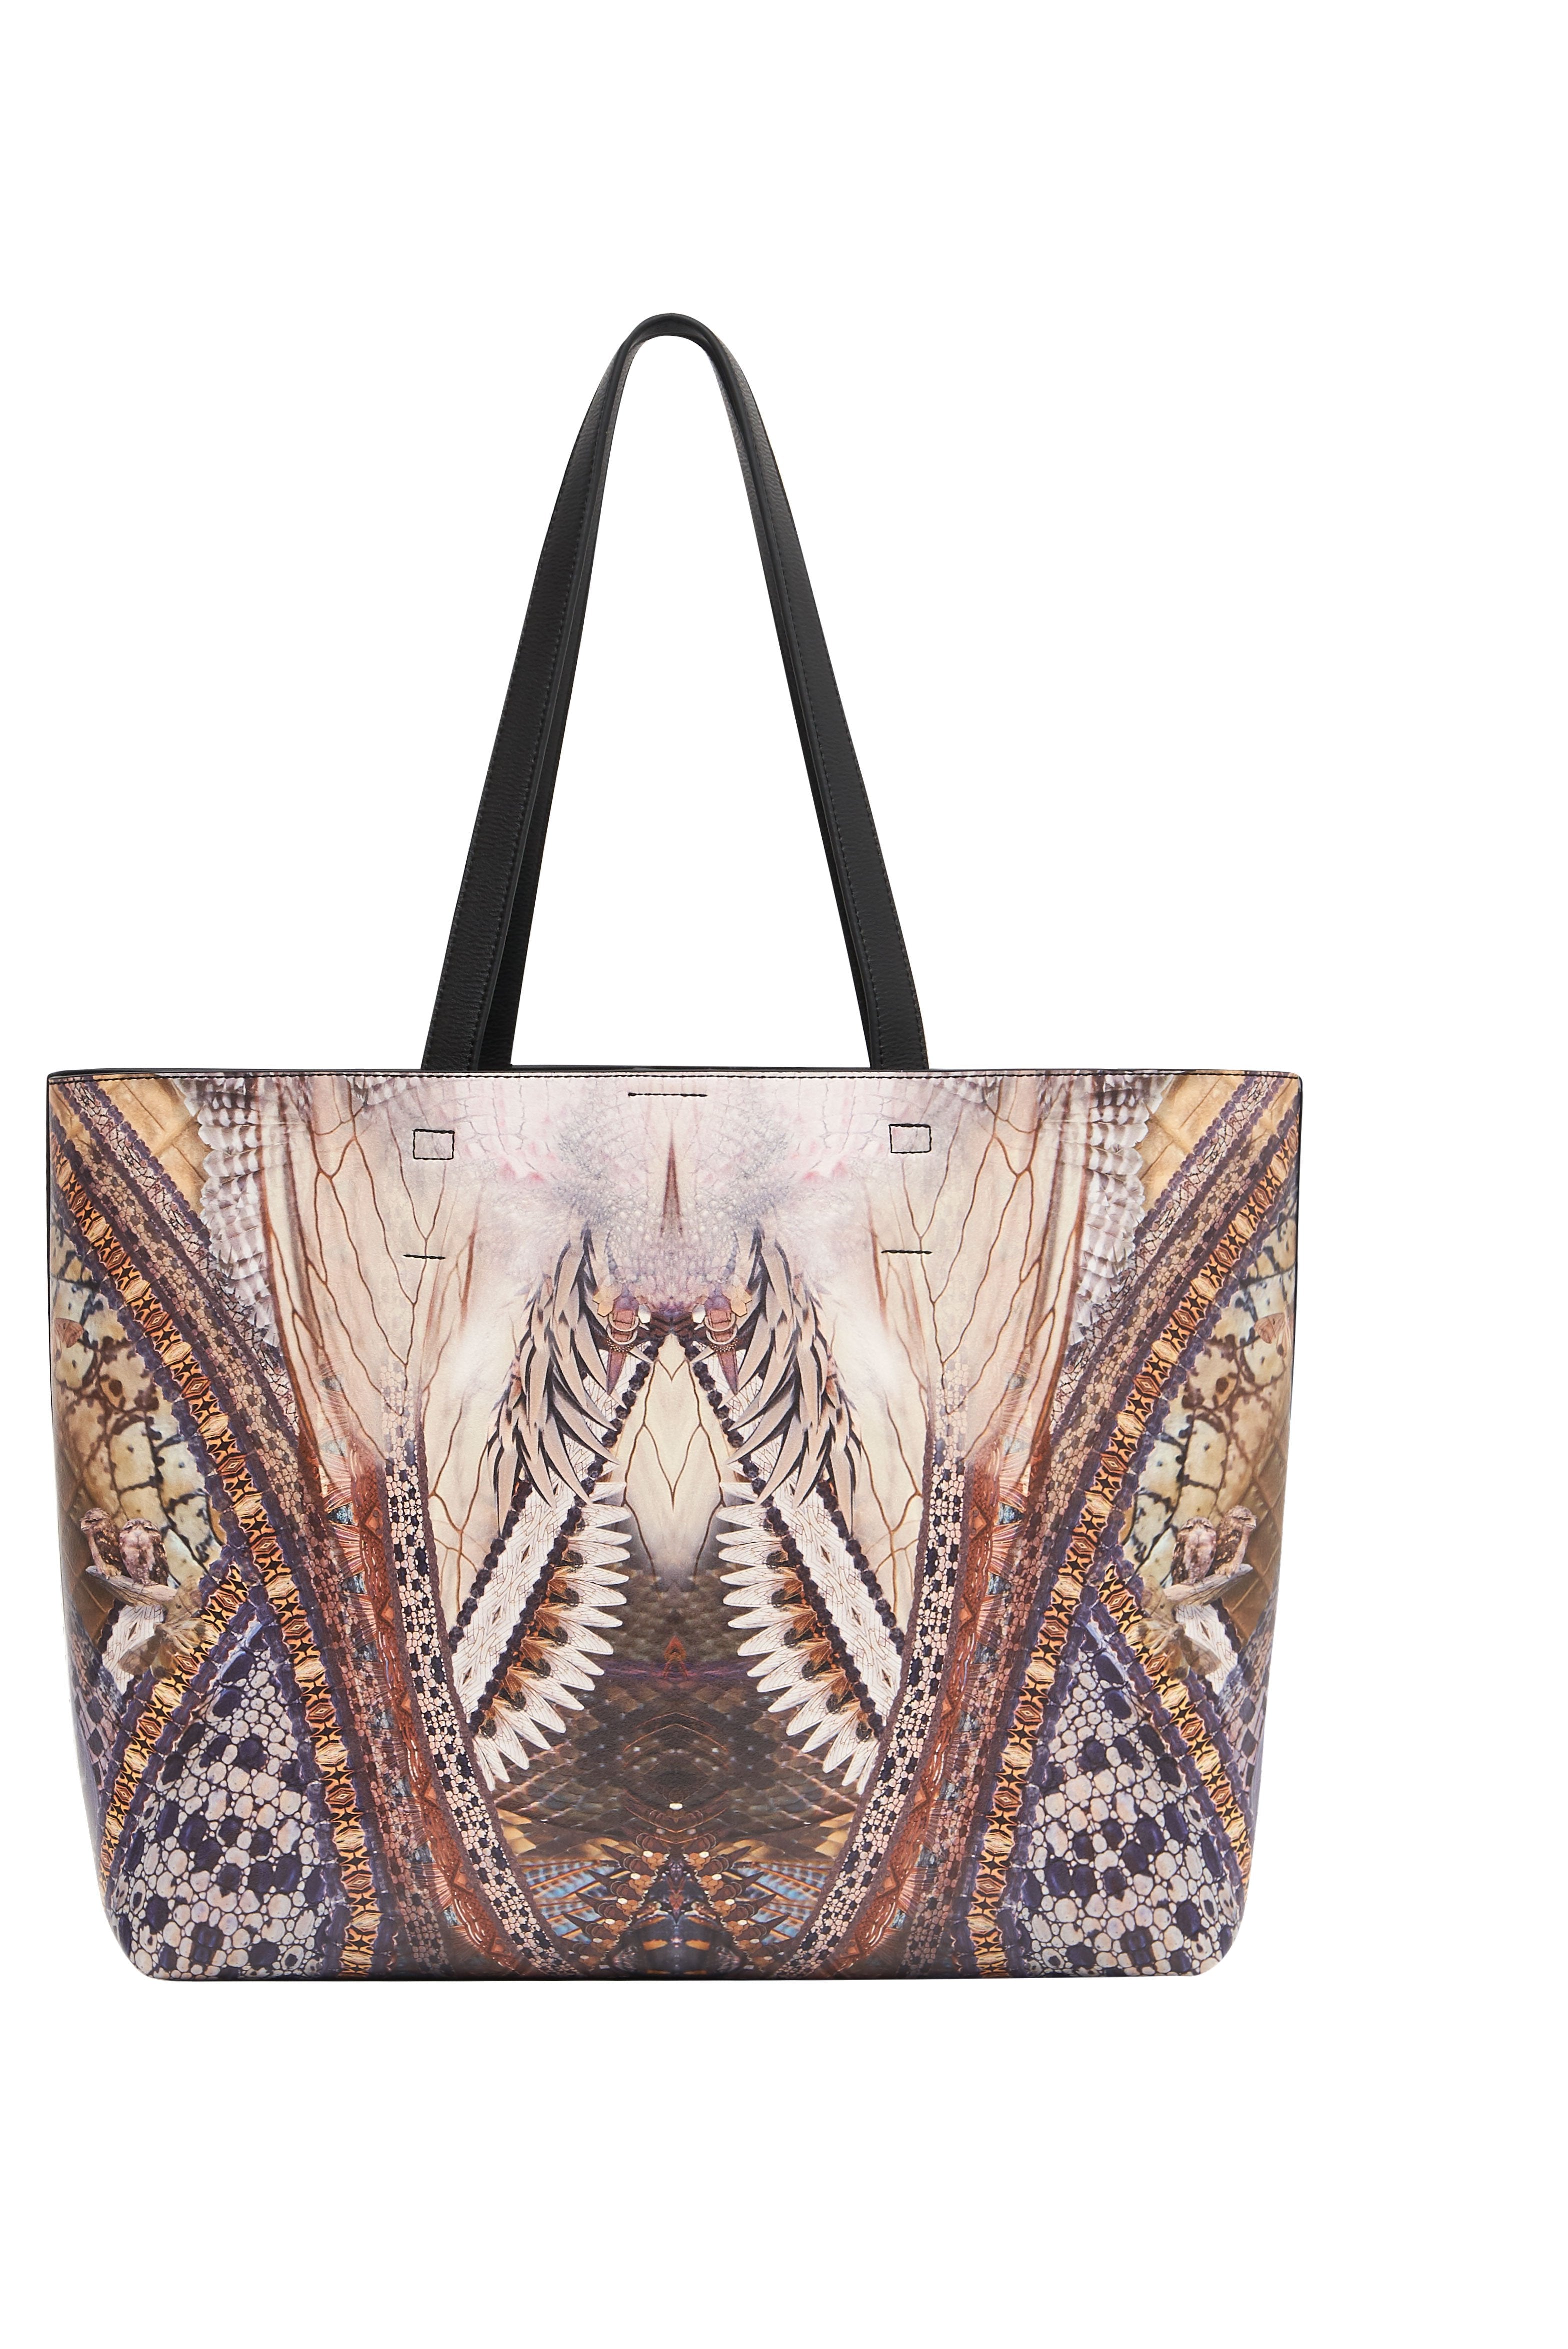 EAST WEST TOTE WITH POUCH KAKADU CALLING